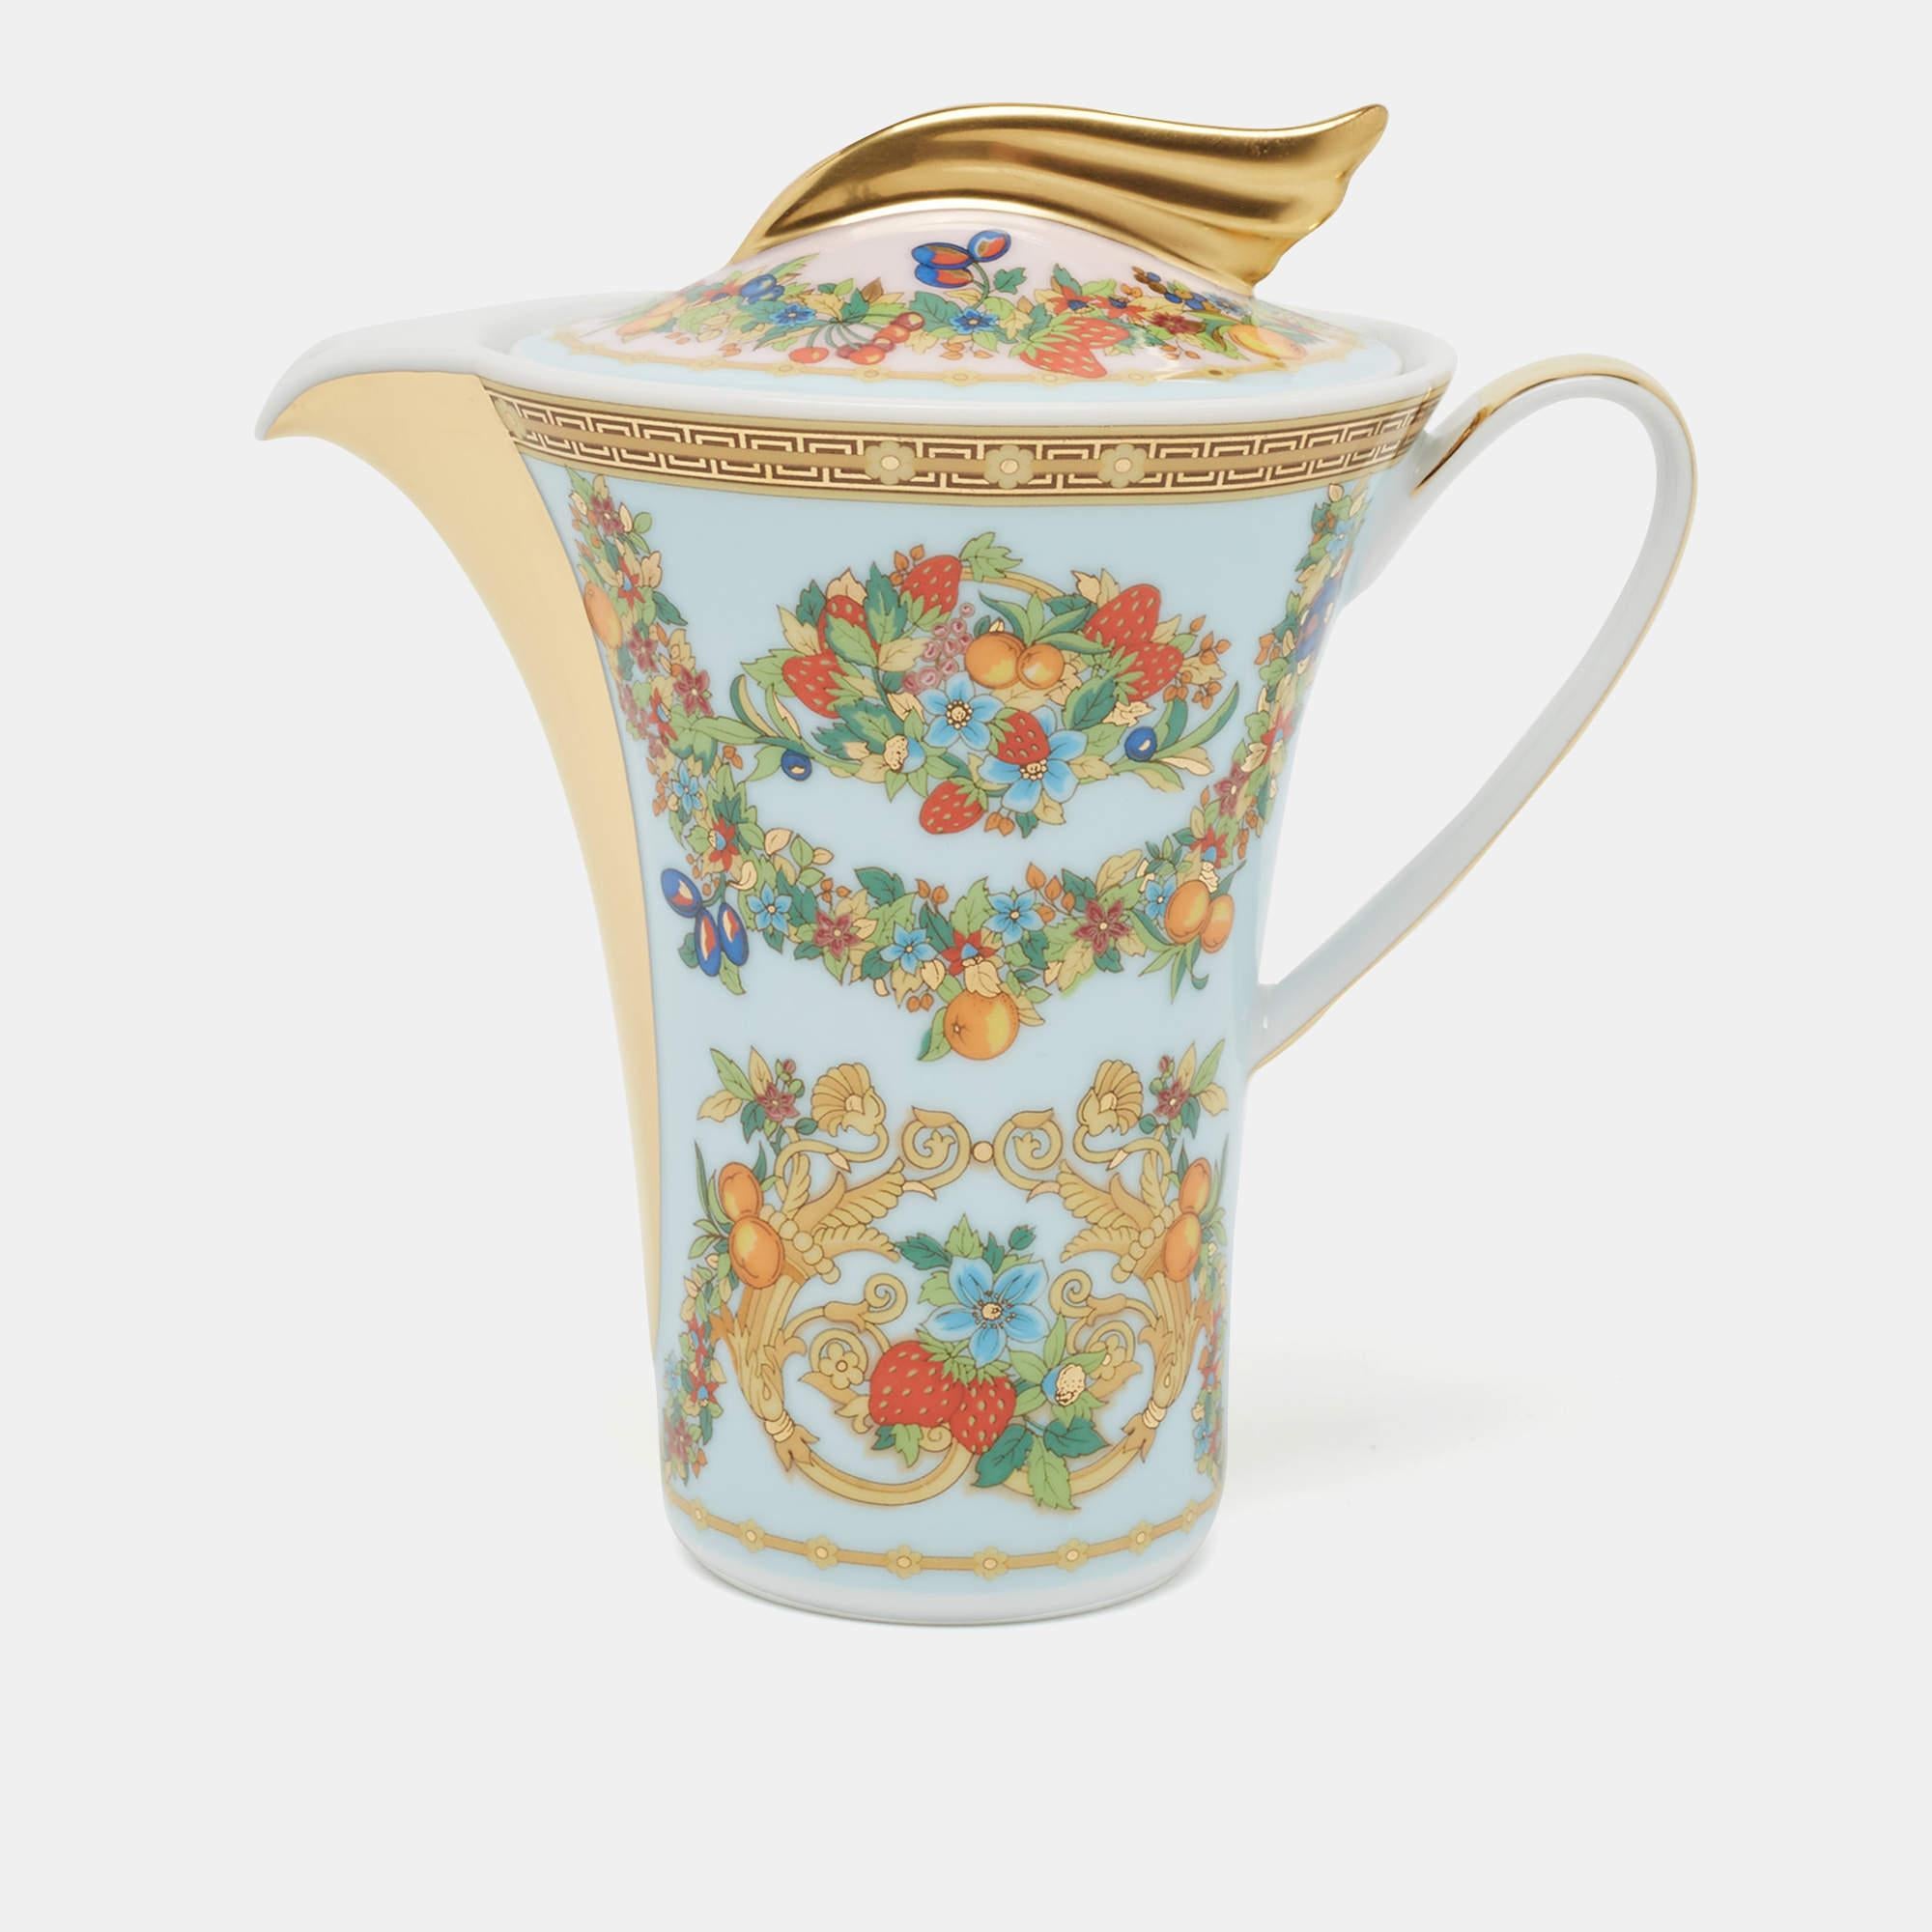 The Rosenthal Meets Versace creamer is an exquisite tableware addition. It is crafted with precision using porcelain and adorned with intricate motifs, infusing luxury and charm into every pour.

Includes: Original Box